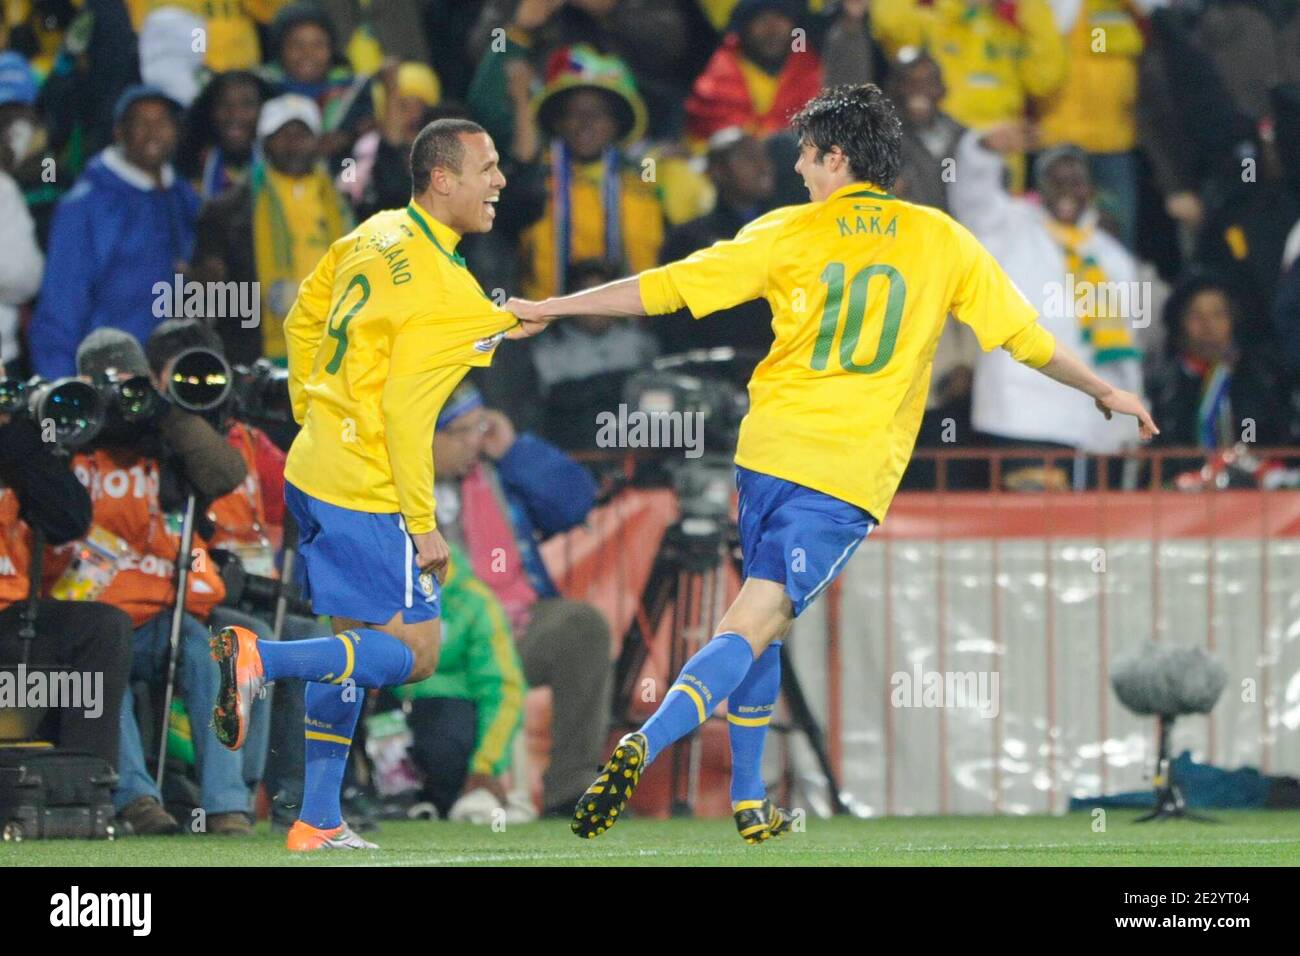 Joy with Kaka after Brazil's Luis Fabiano scores the 2-0 goal during the 2010 FIFA World Cup South Africa 1/8 of final Soccer match, Brazil vs Chile at Ellis Park football stadium in Johannesburg, South Africa on June 28, 2010. Brazil won 3-0. Photo by Henri Szwarc/Cameleon/ABACAPRESS.COM Stock Photo